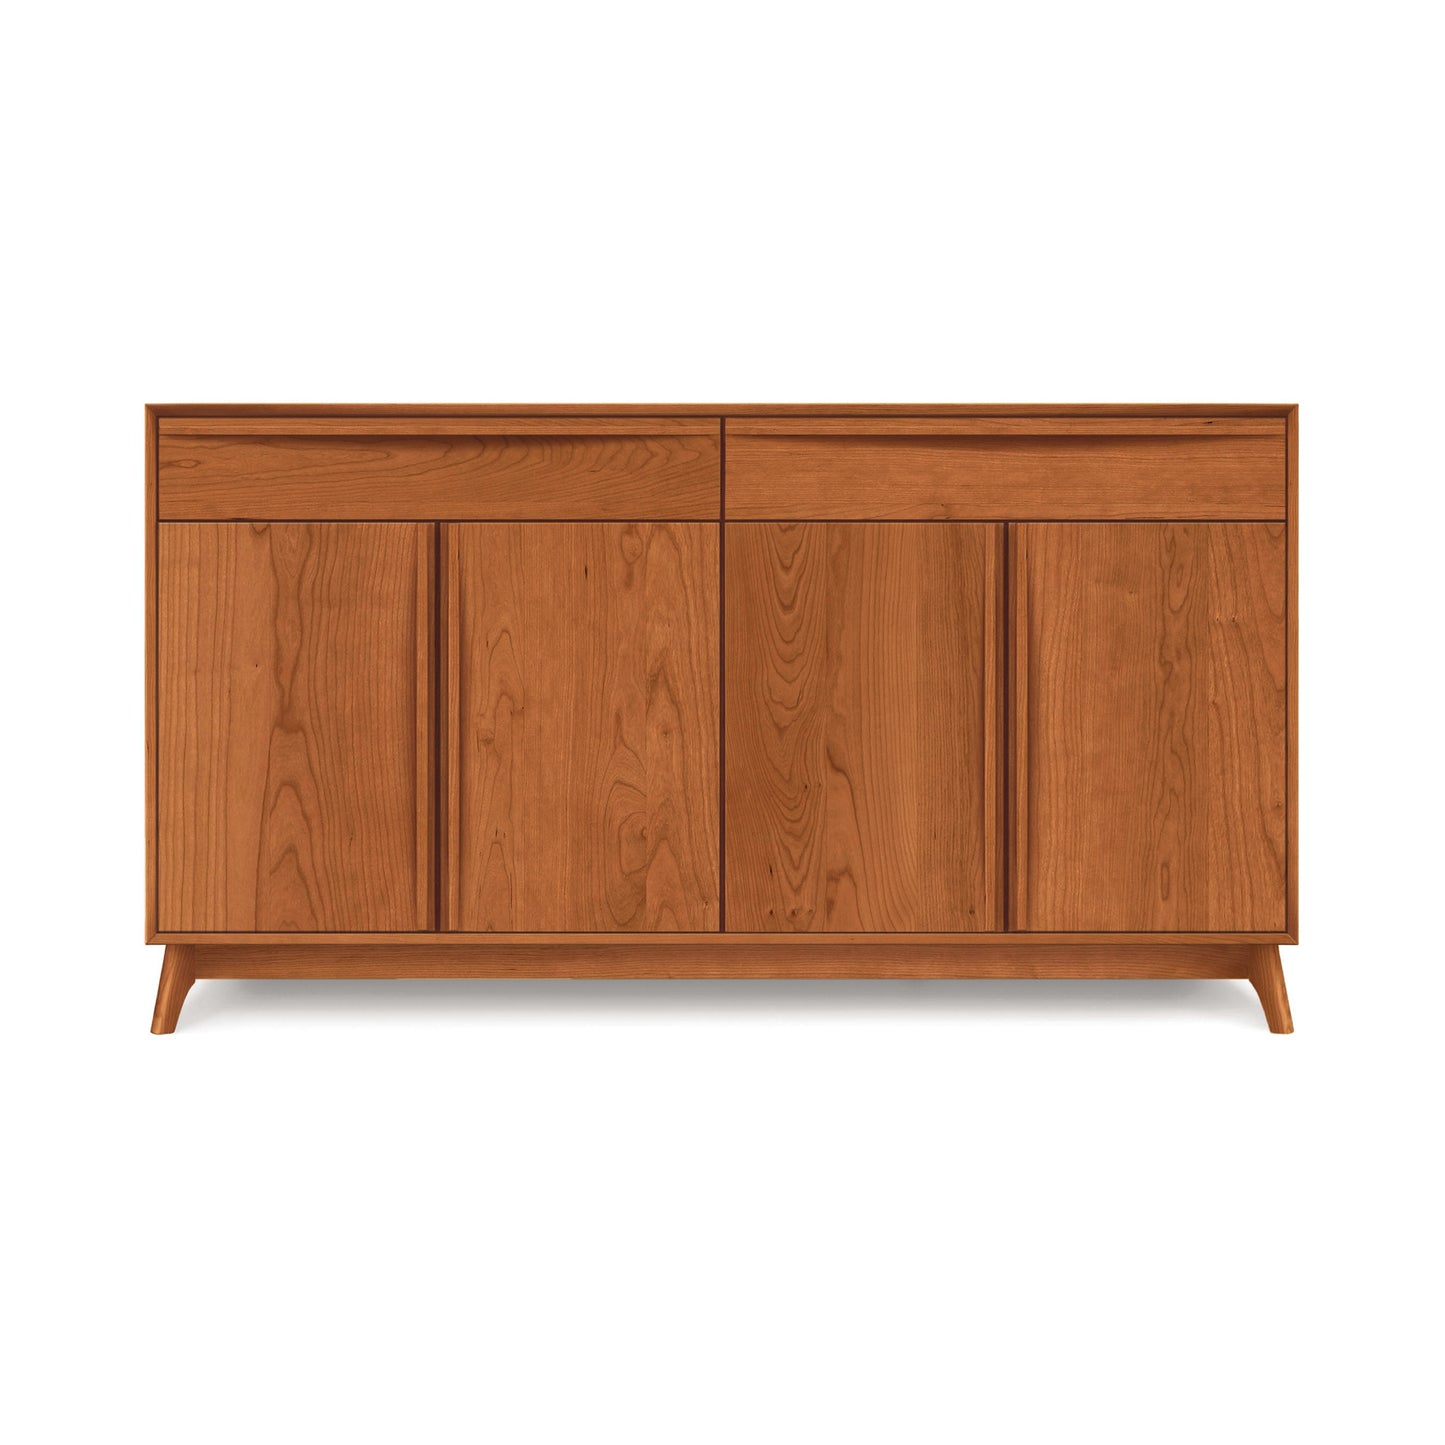 A handcrafted in Vermont, Copeland Furniture Catalina 2-Drawers, 4-Door Buffet sideboard with closed doors on a plain white background.